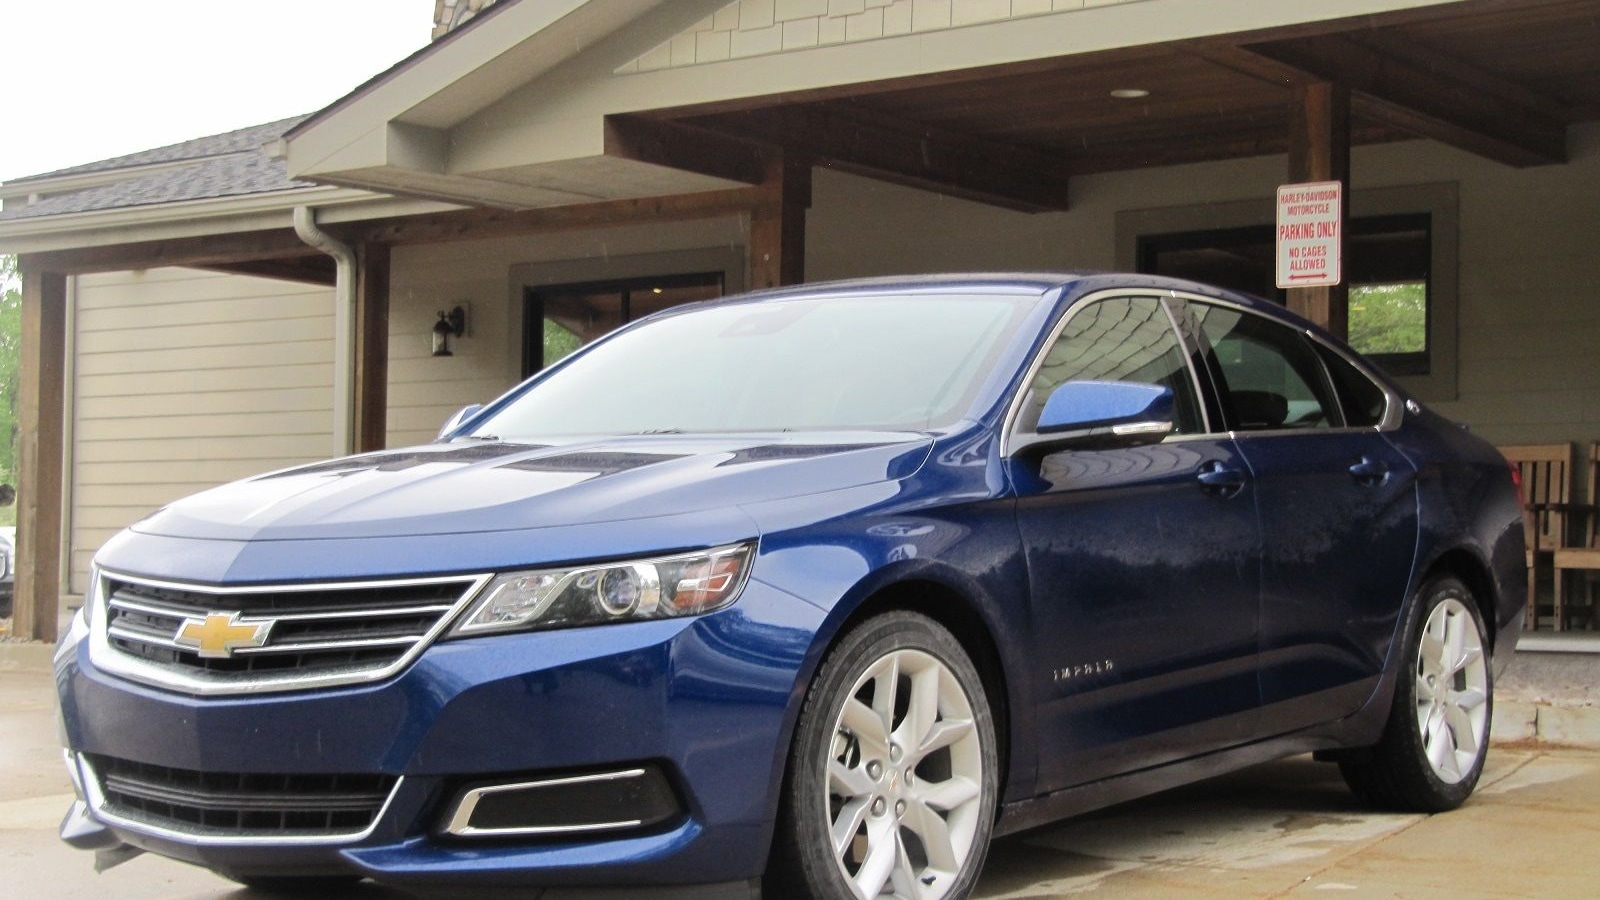 2014 Chevrolet Impala, test drive in Hell, Michigan